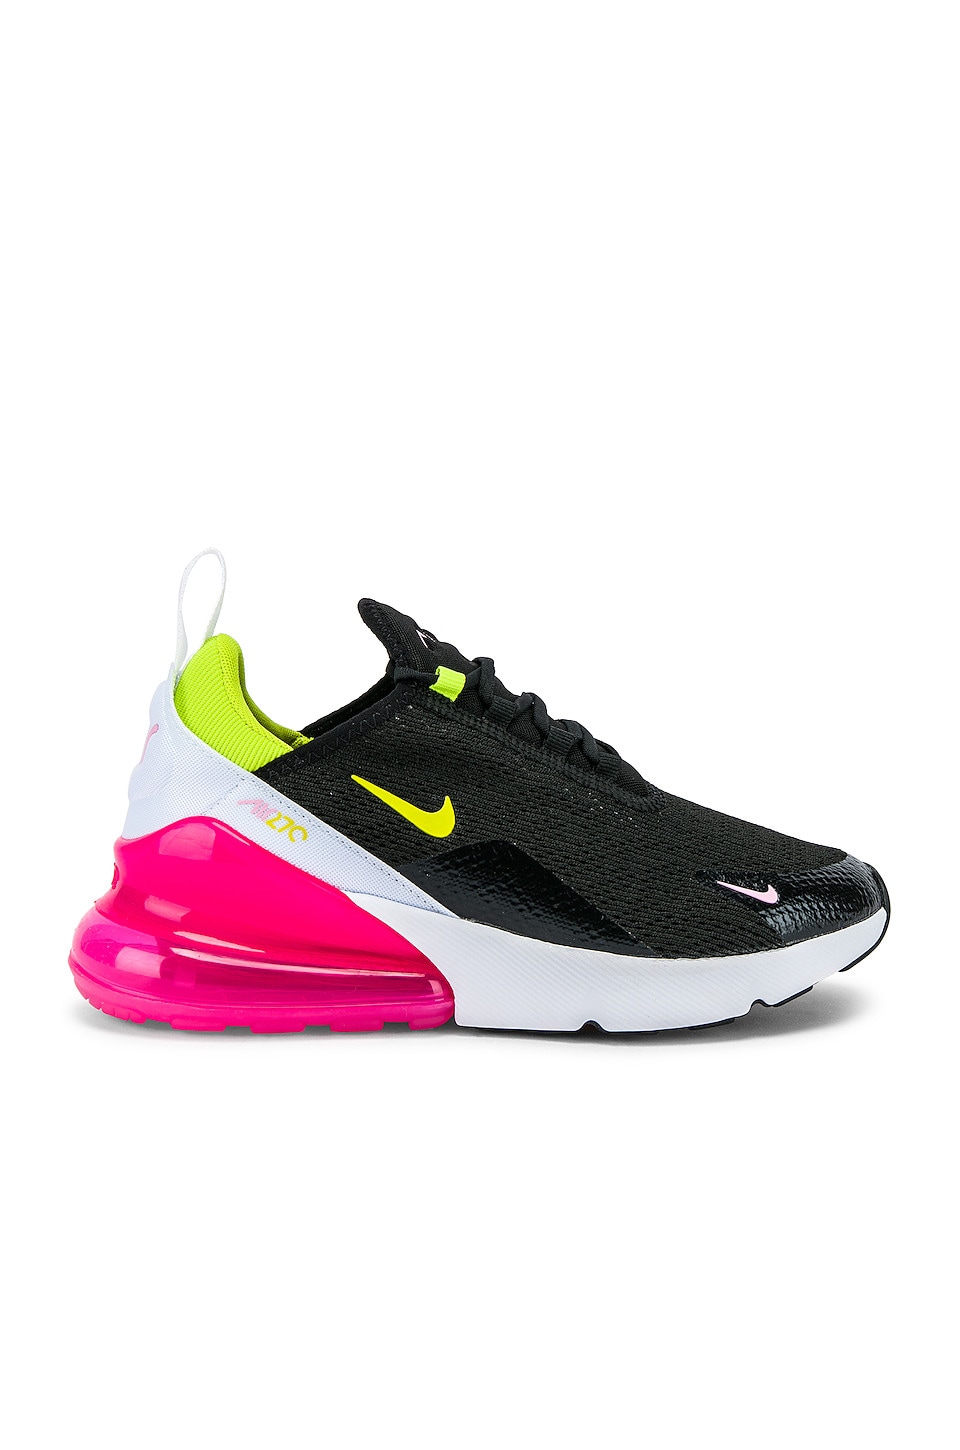 pink and black nike 270